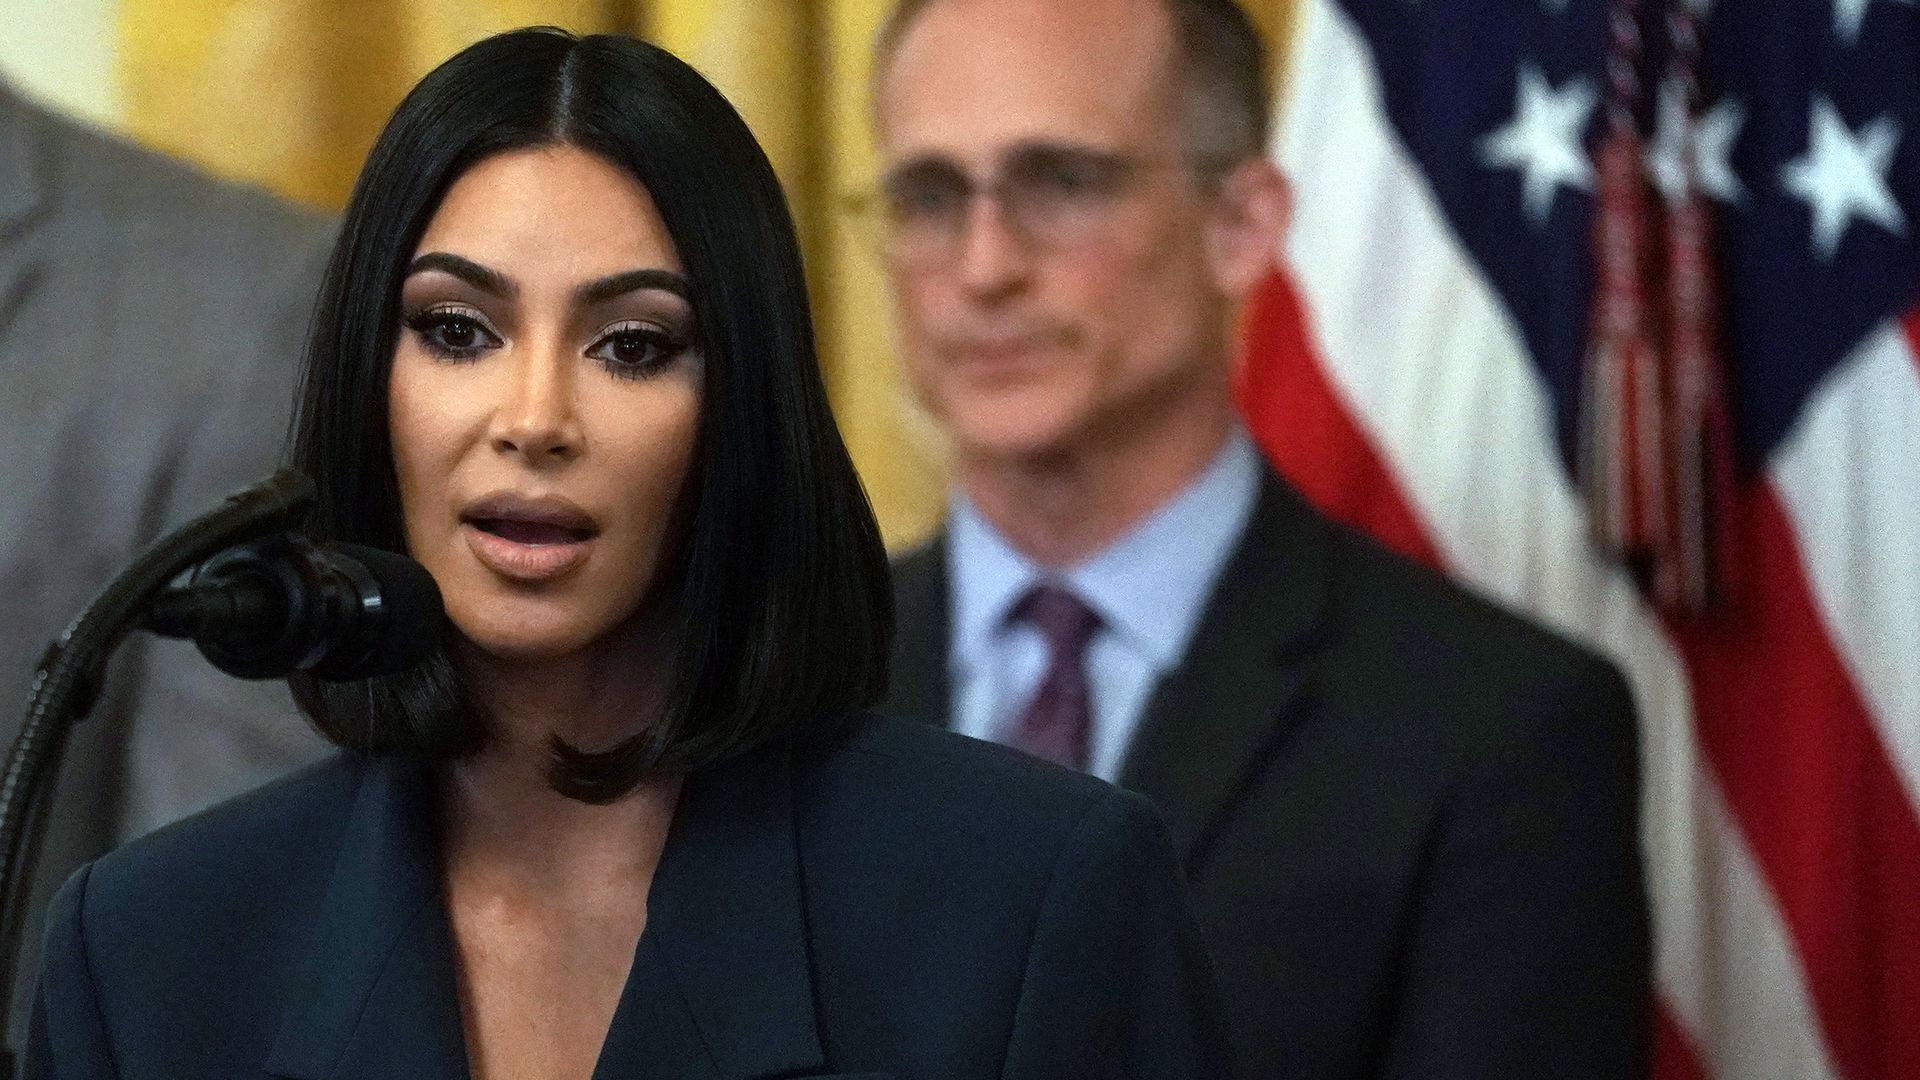 Kim Kardashian speaks at a White House event with an American flag in the background.